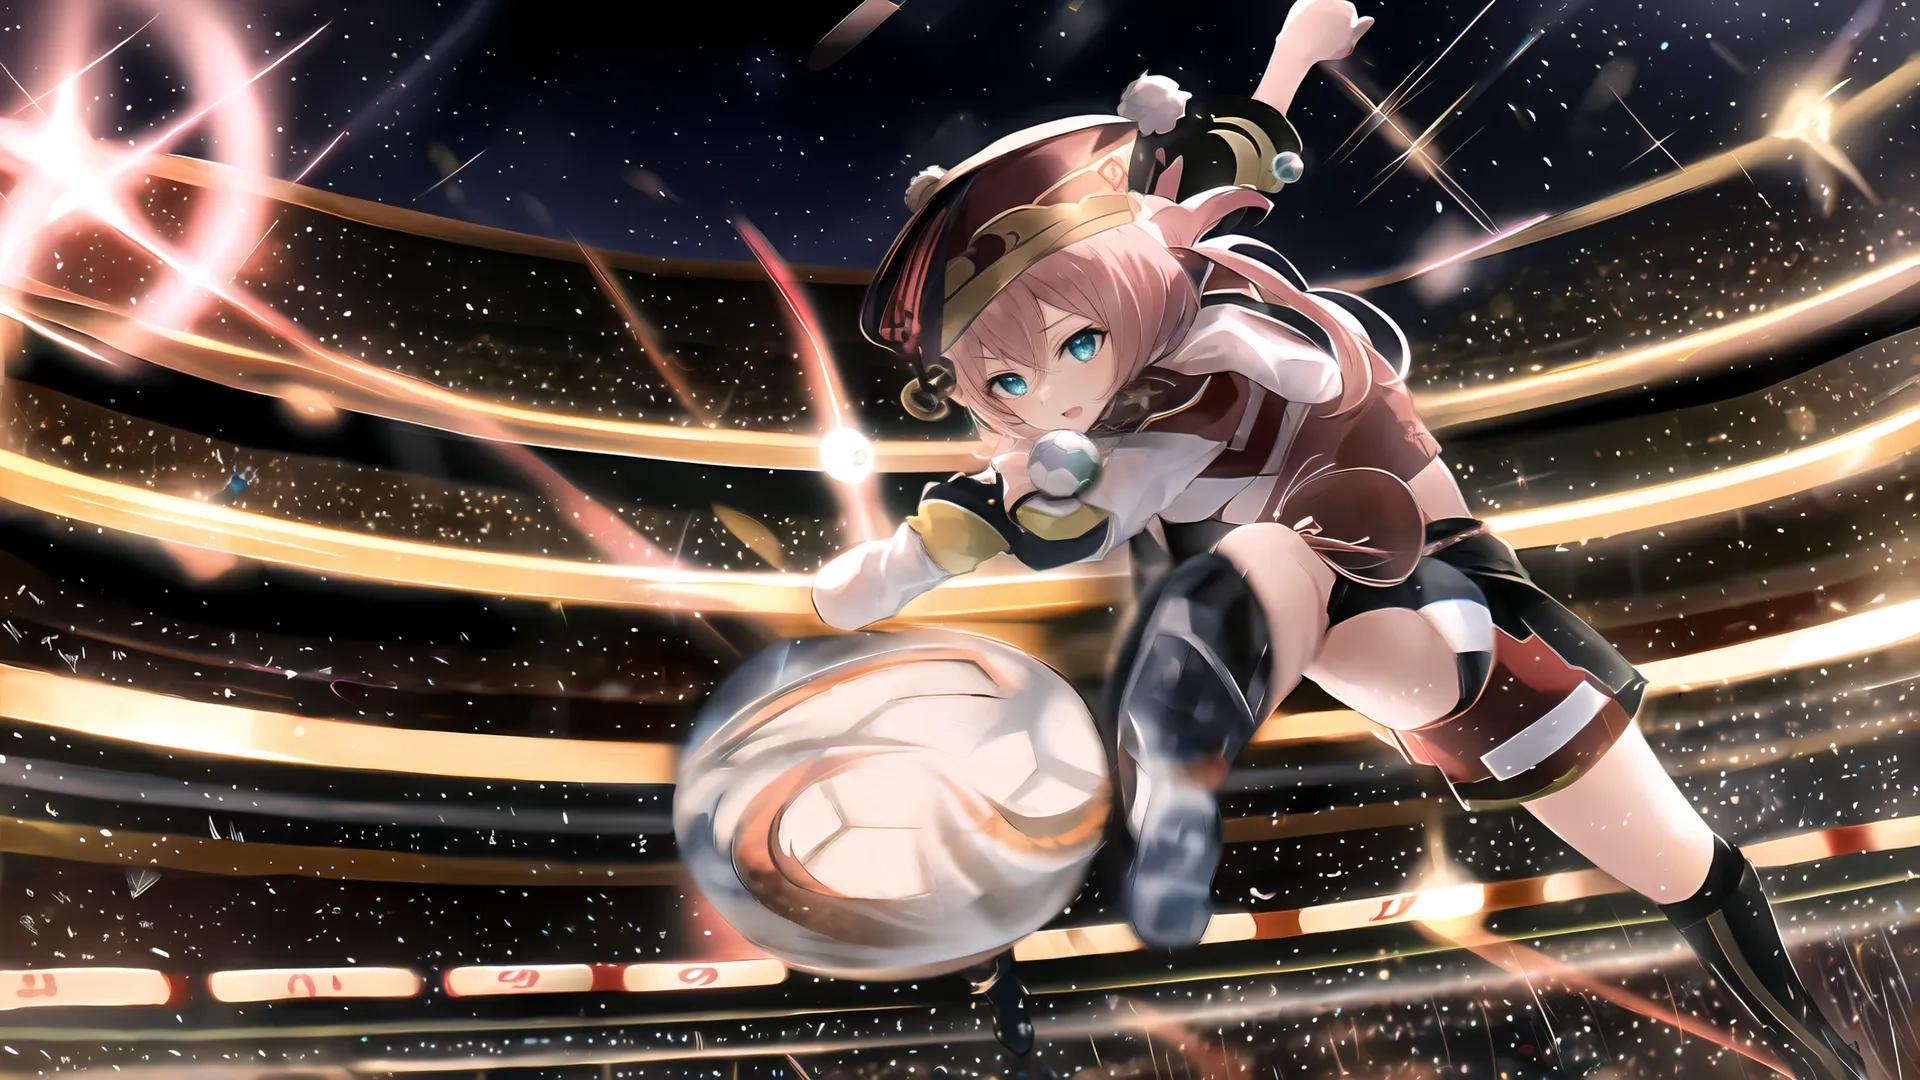 a beautiful young woman kicking a white soccer ball while in an arena on some seats with lights on a clear night sky behind her, with light
